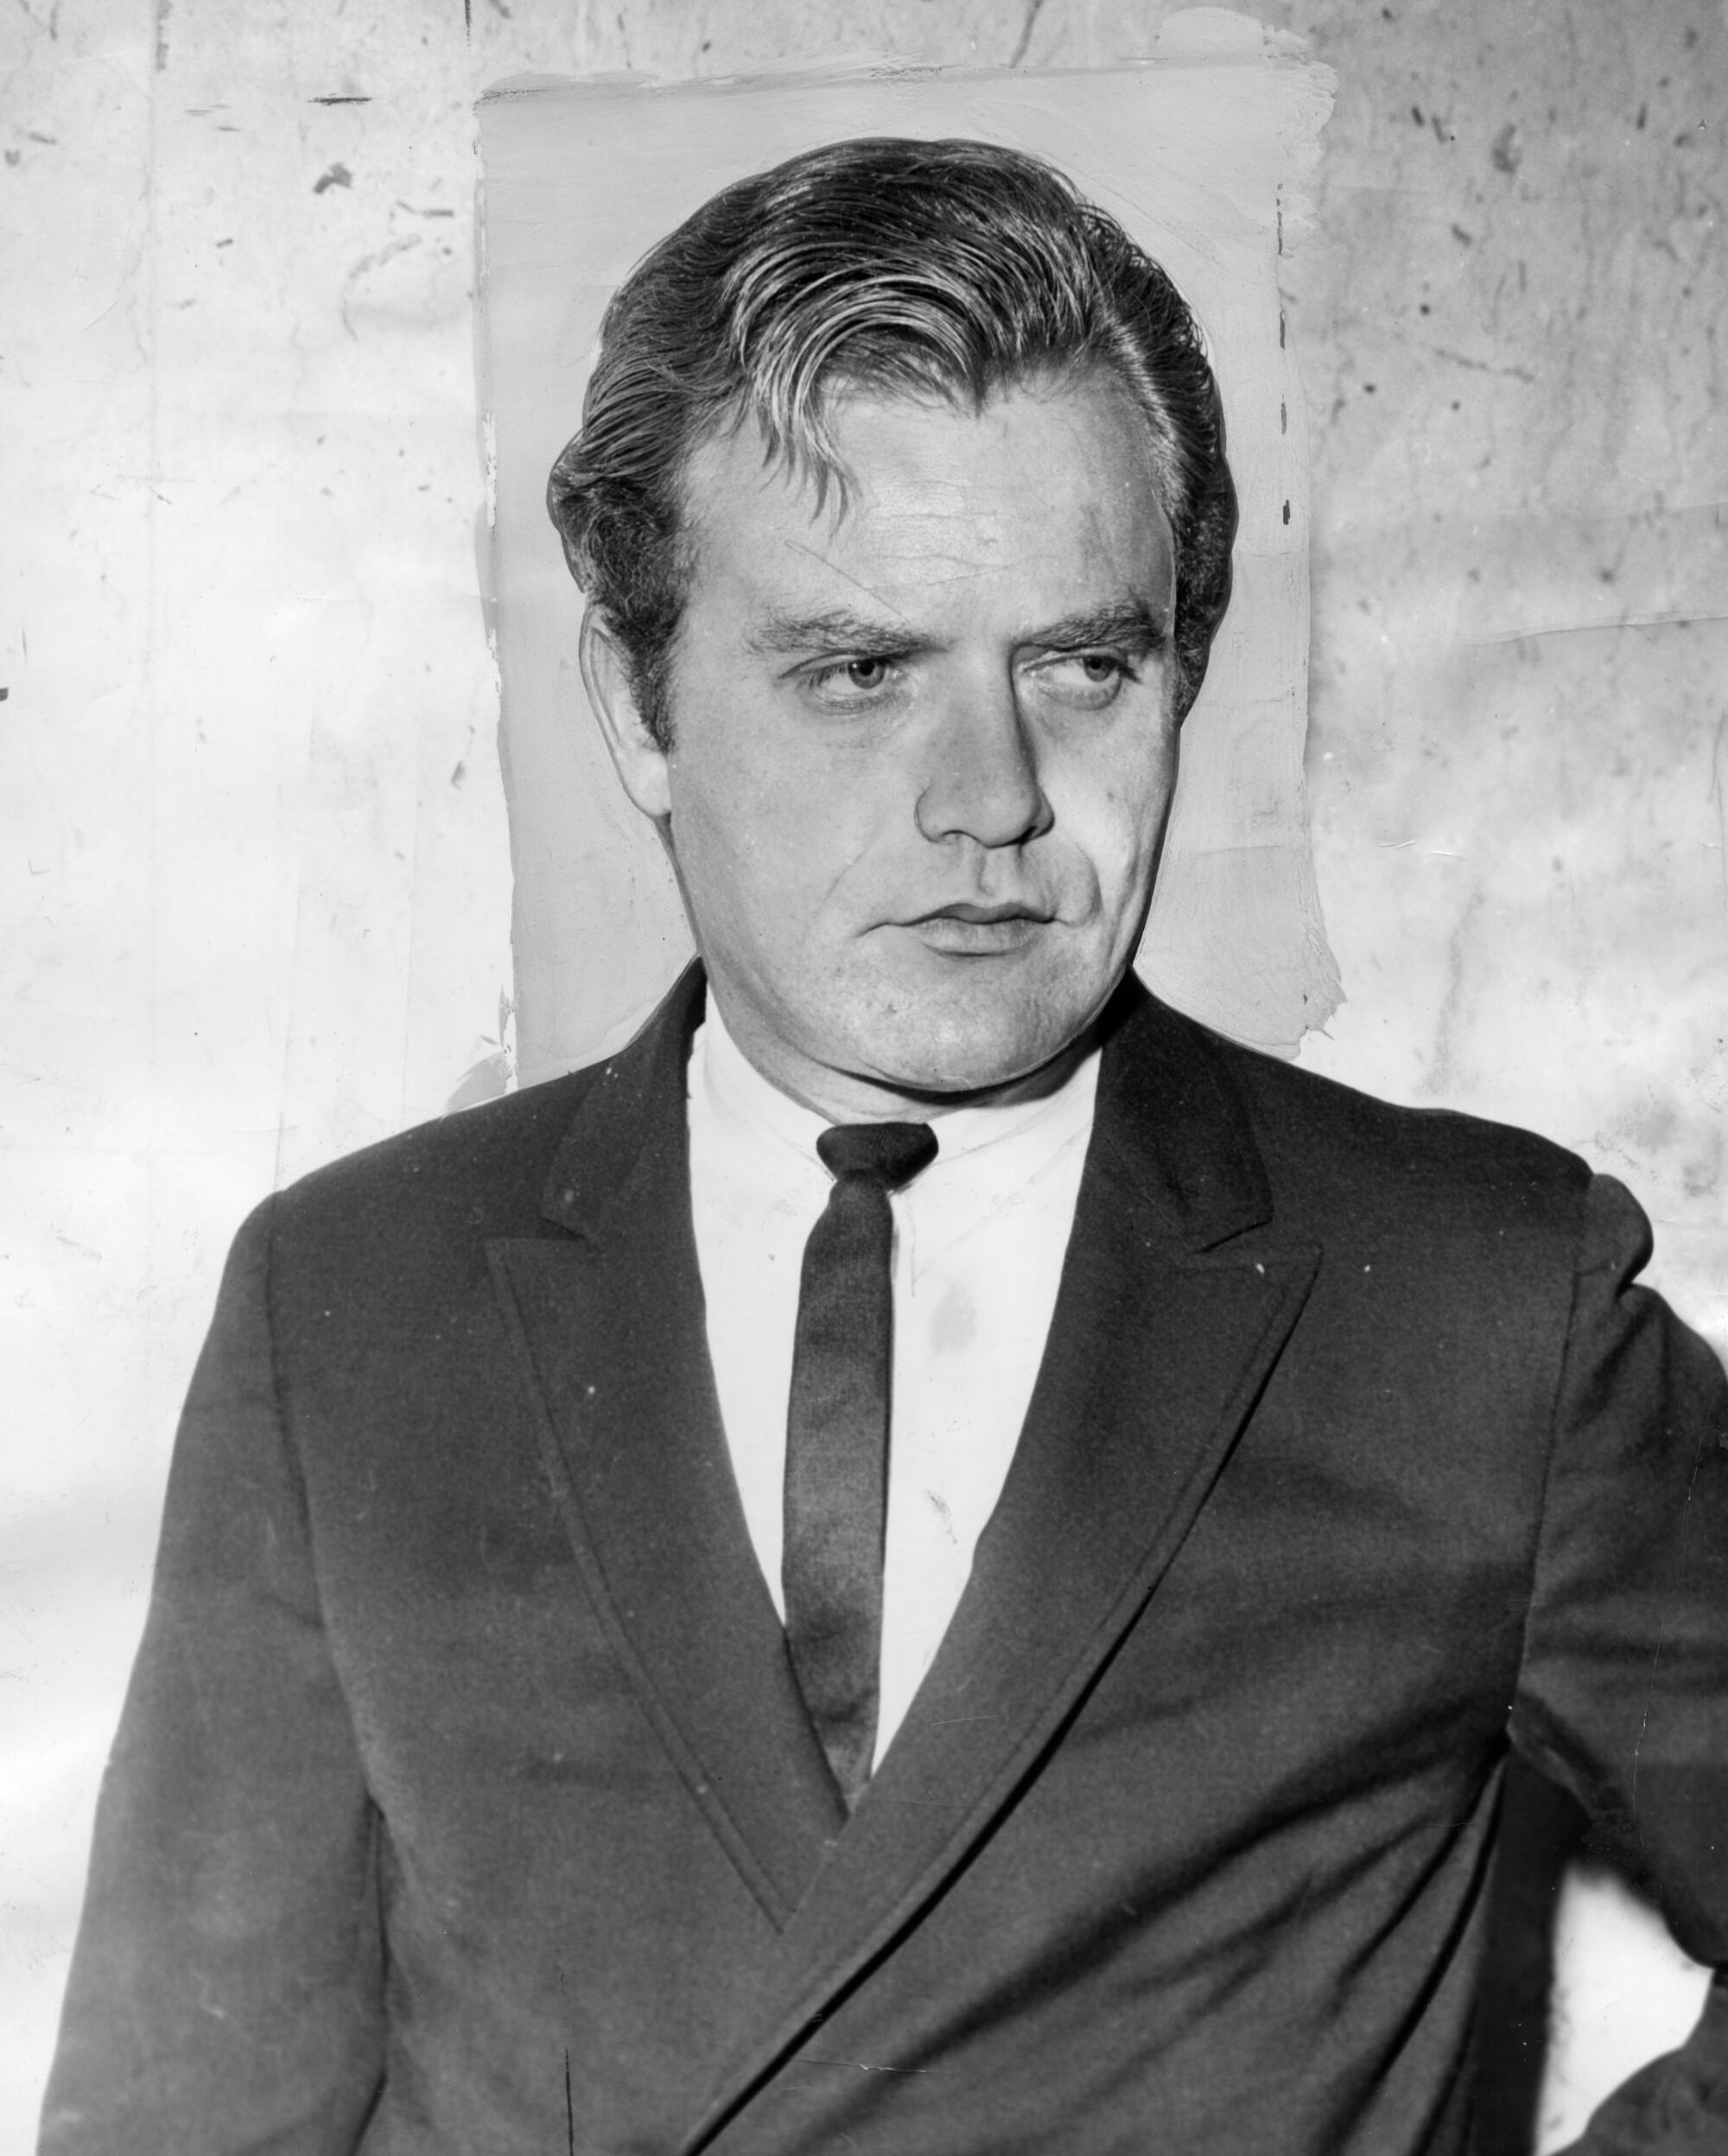 Actor Vic Morrow was a veteran of TV and film, best known for his role in the war drama "Combat!"